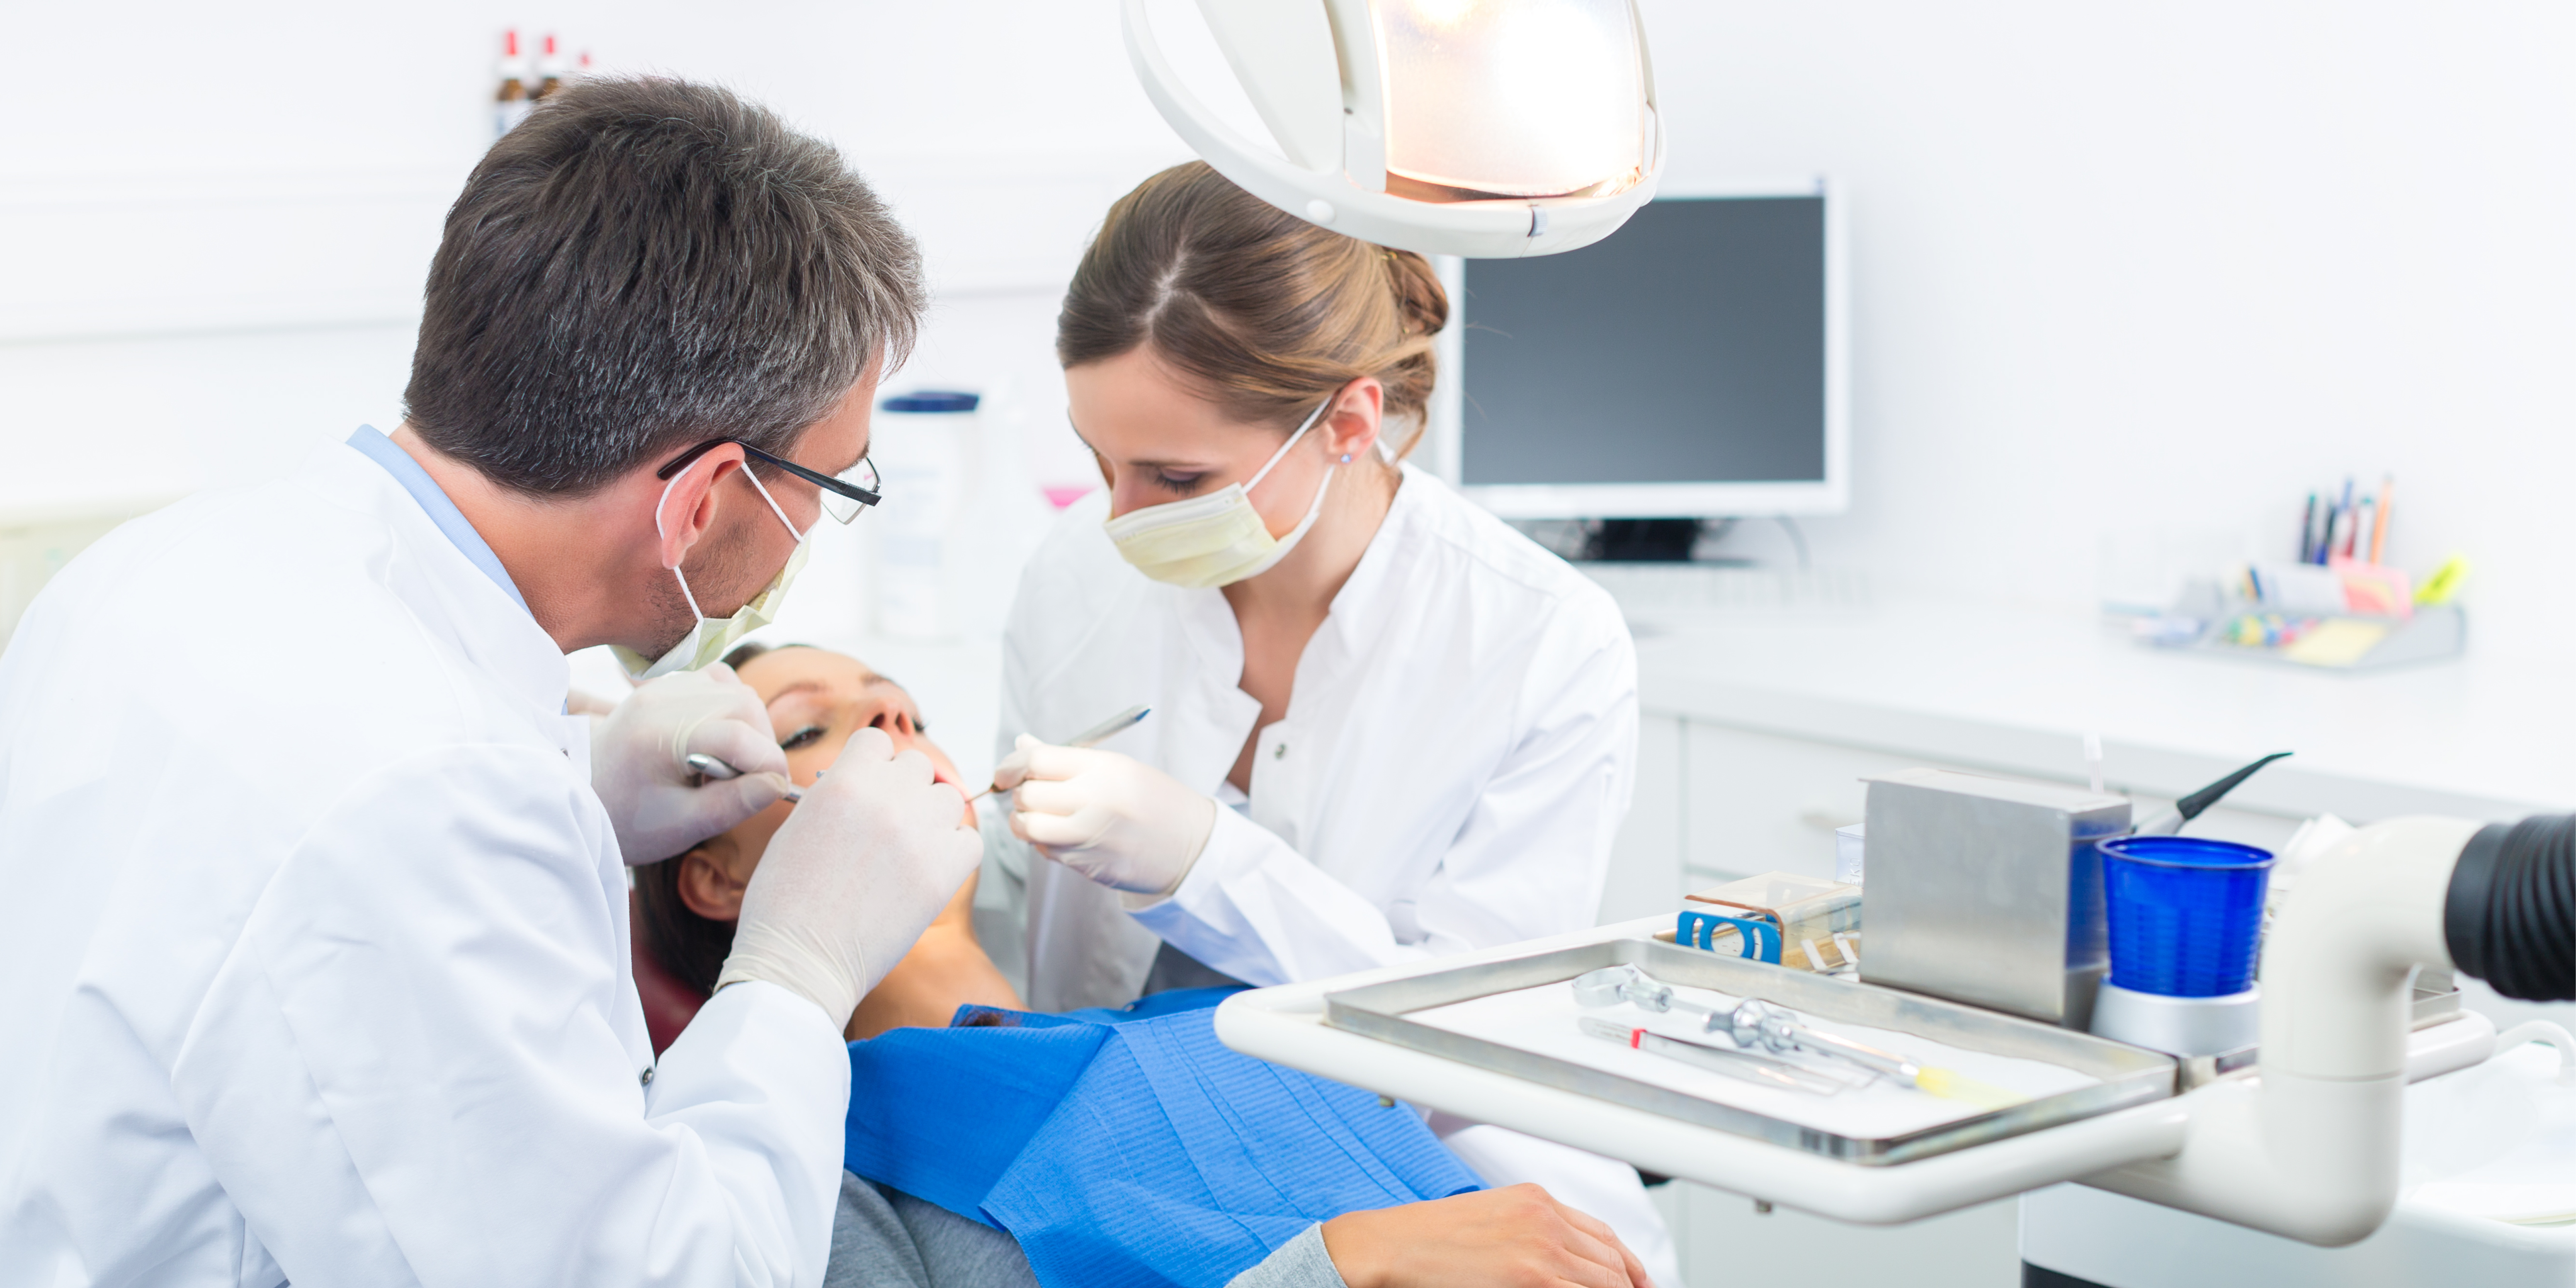 Dental assistant working with patient